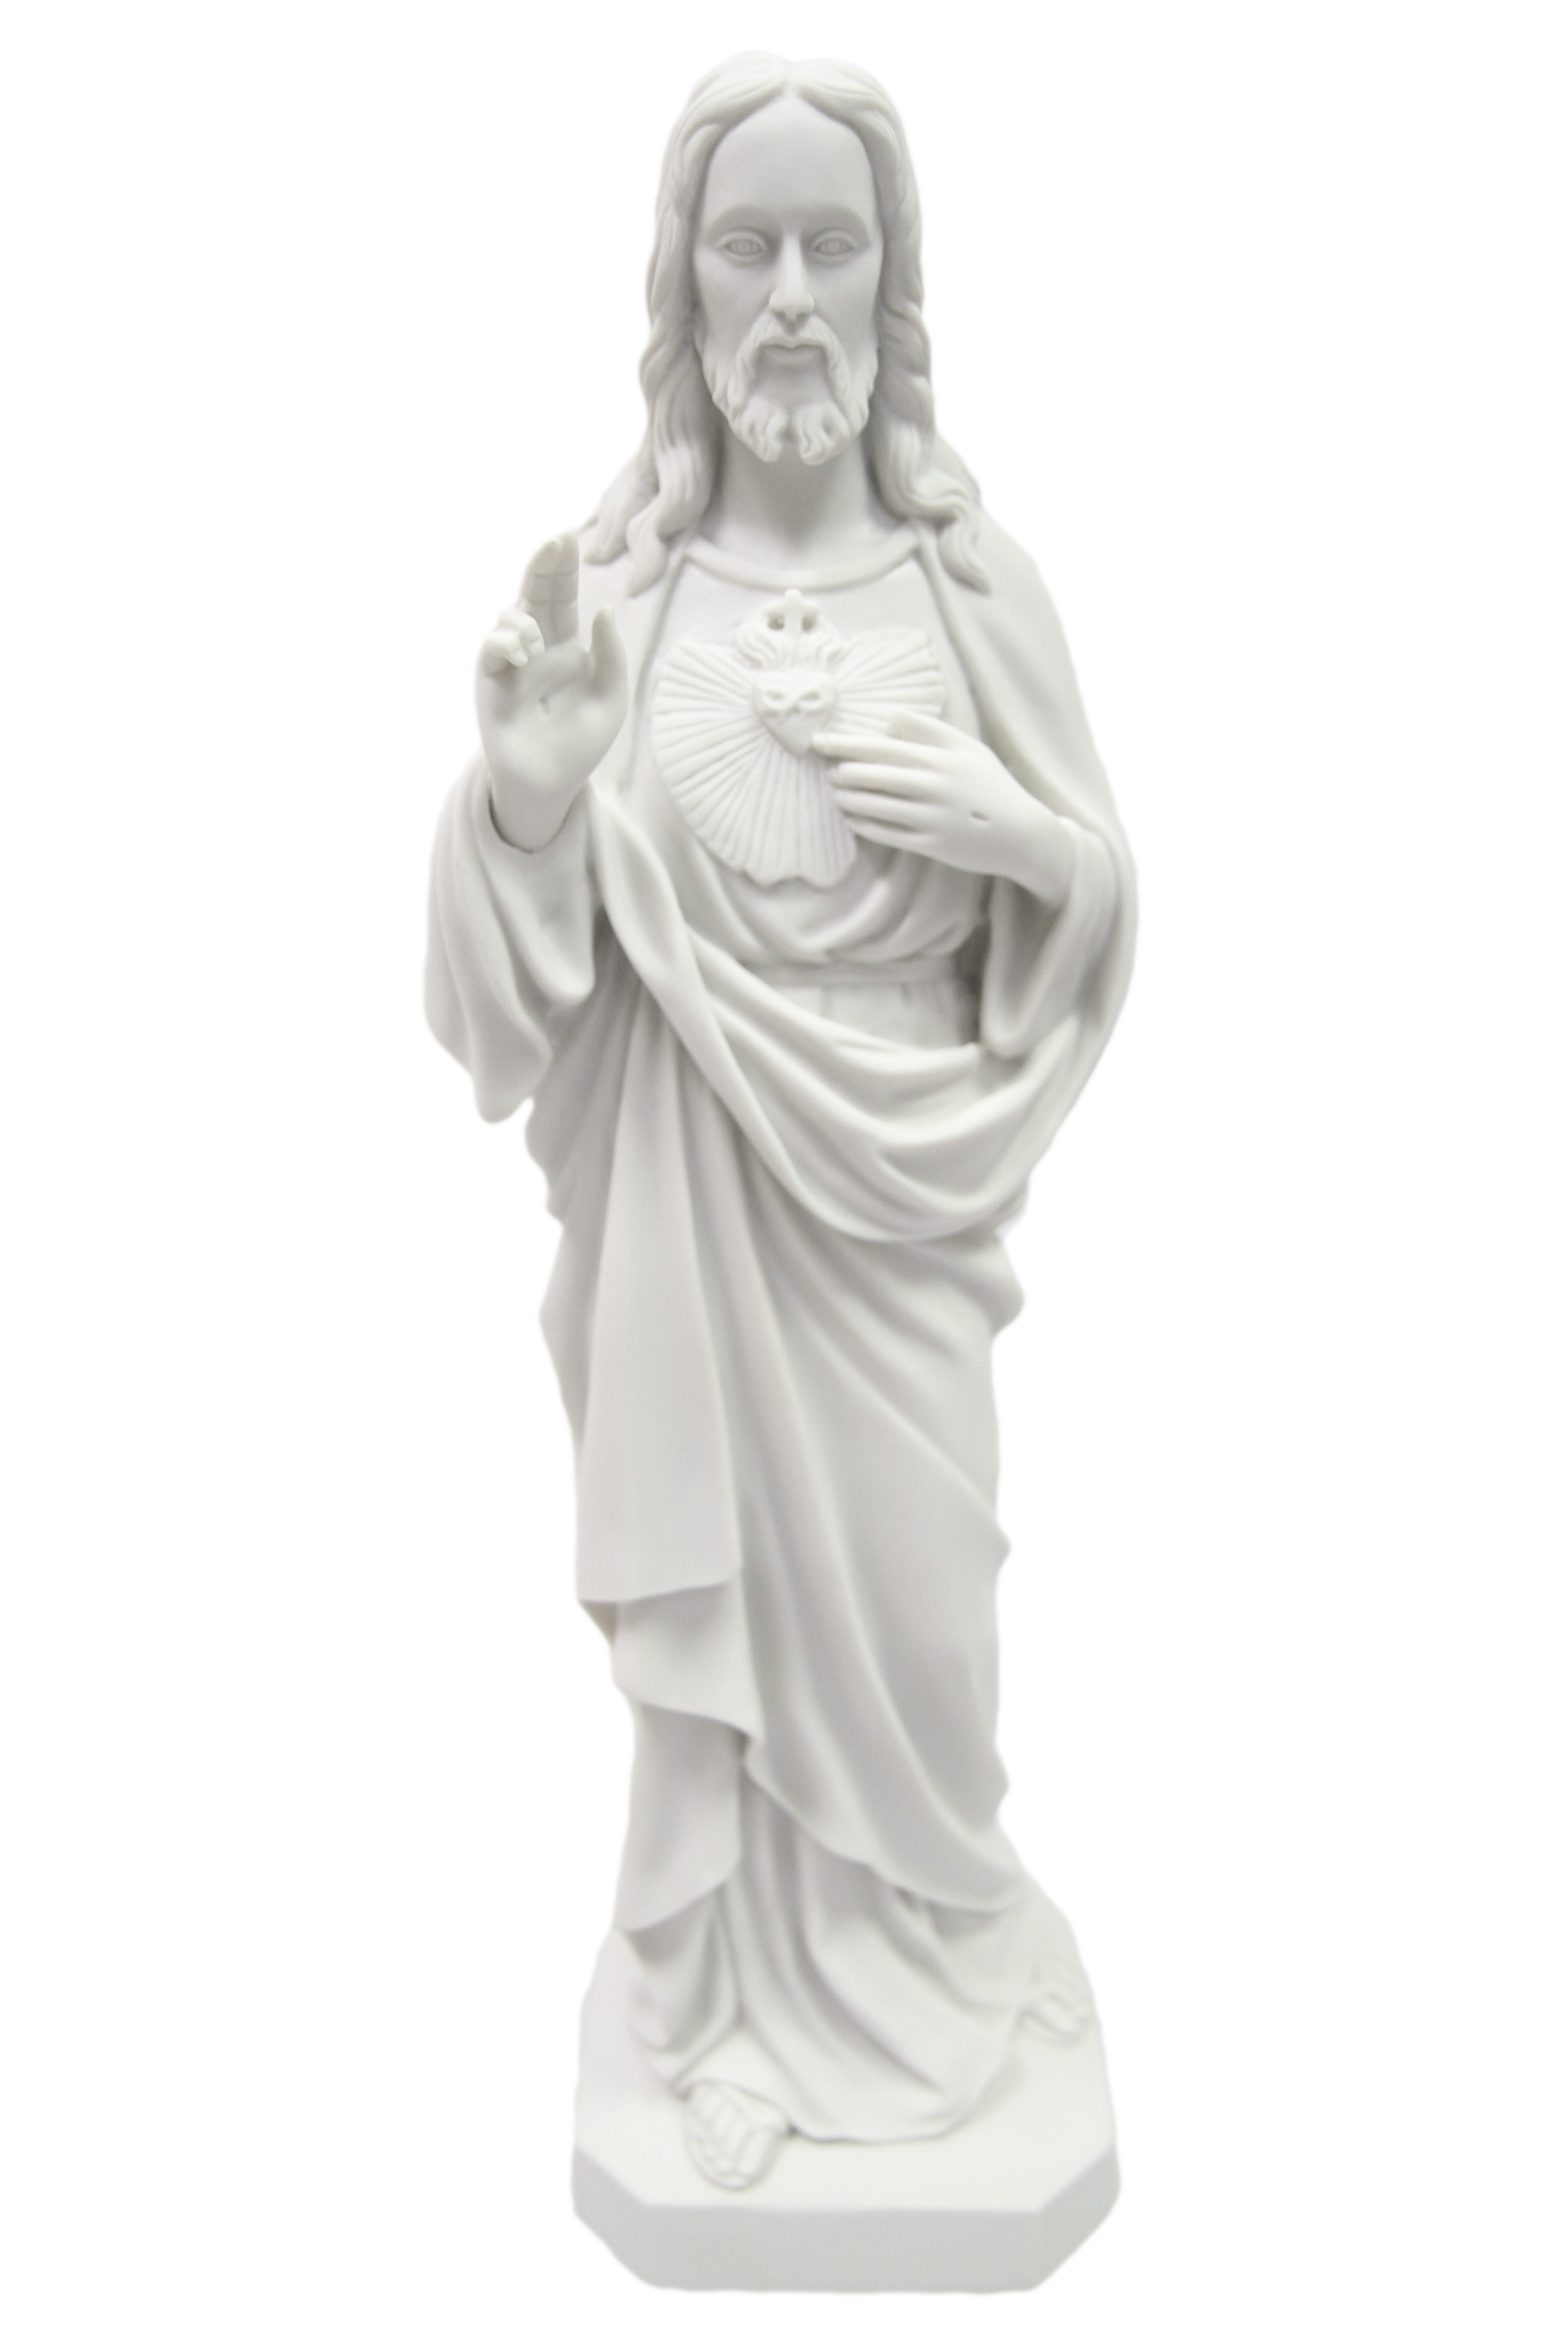 20 Inch Sacred Heart of Jesus Catholic Statue Sculpture Vittoria Collection Made in Italy